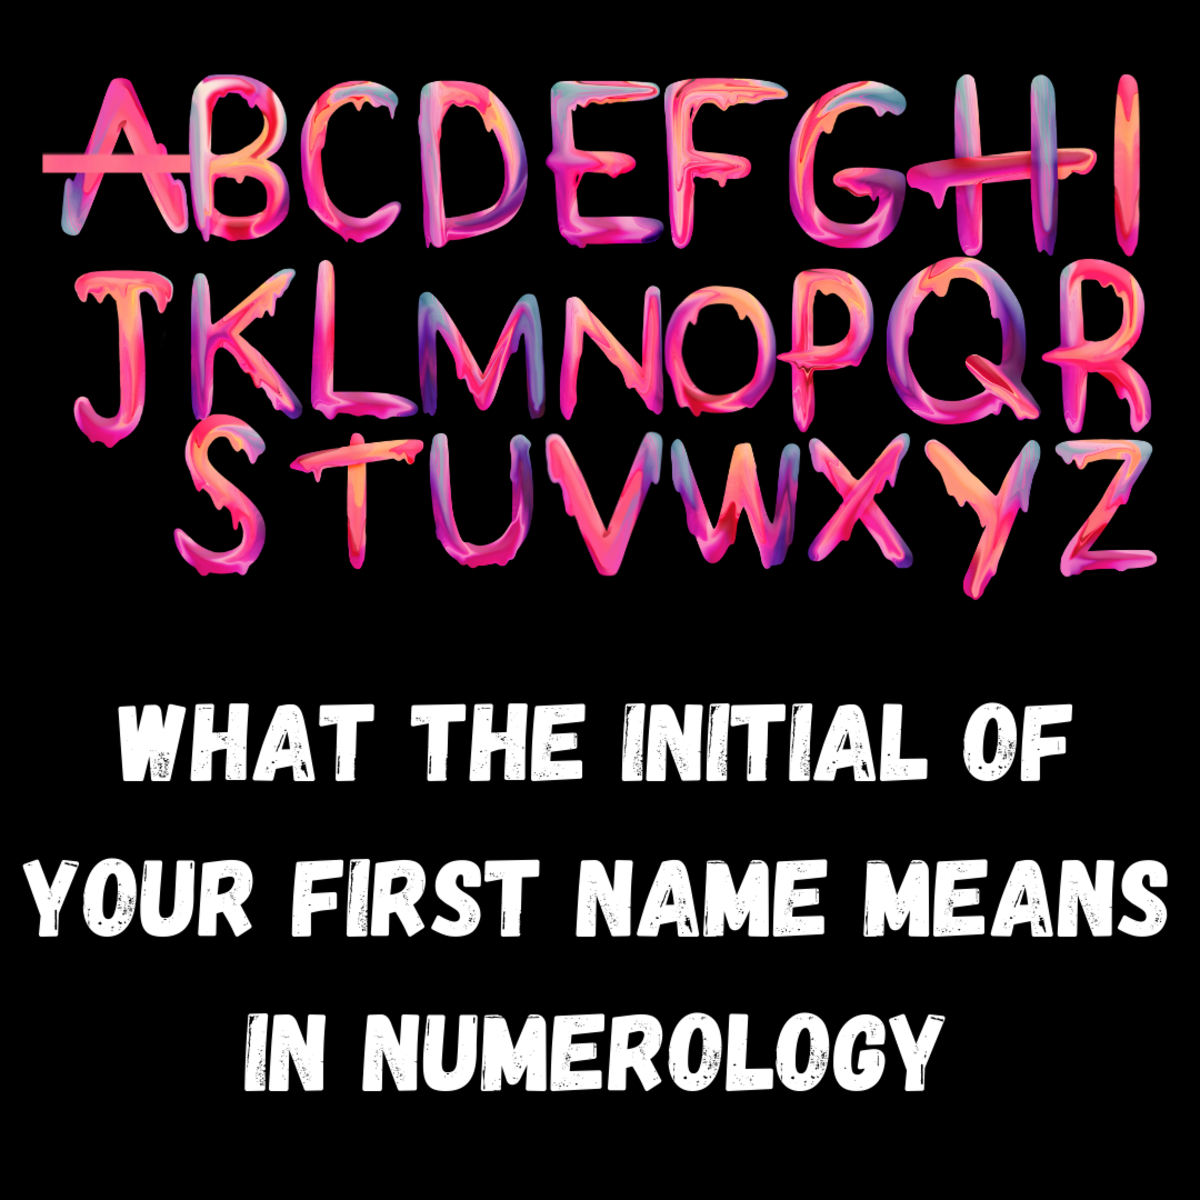 Read on to learn what the initial of your first name means in numerology.